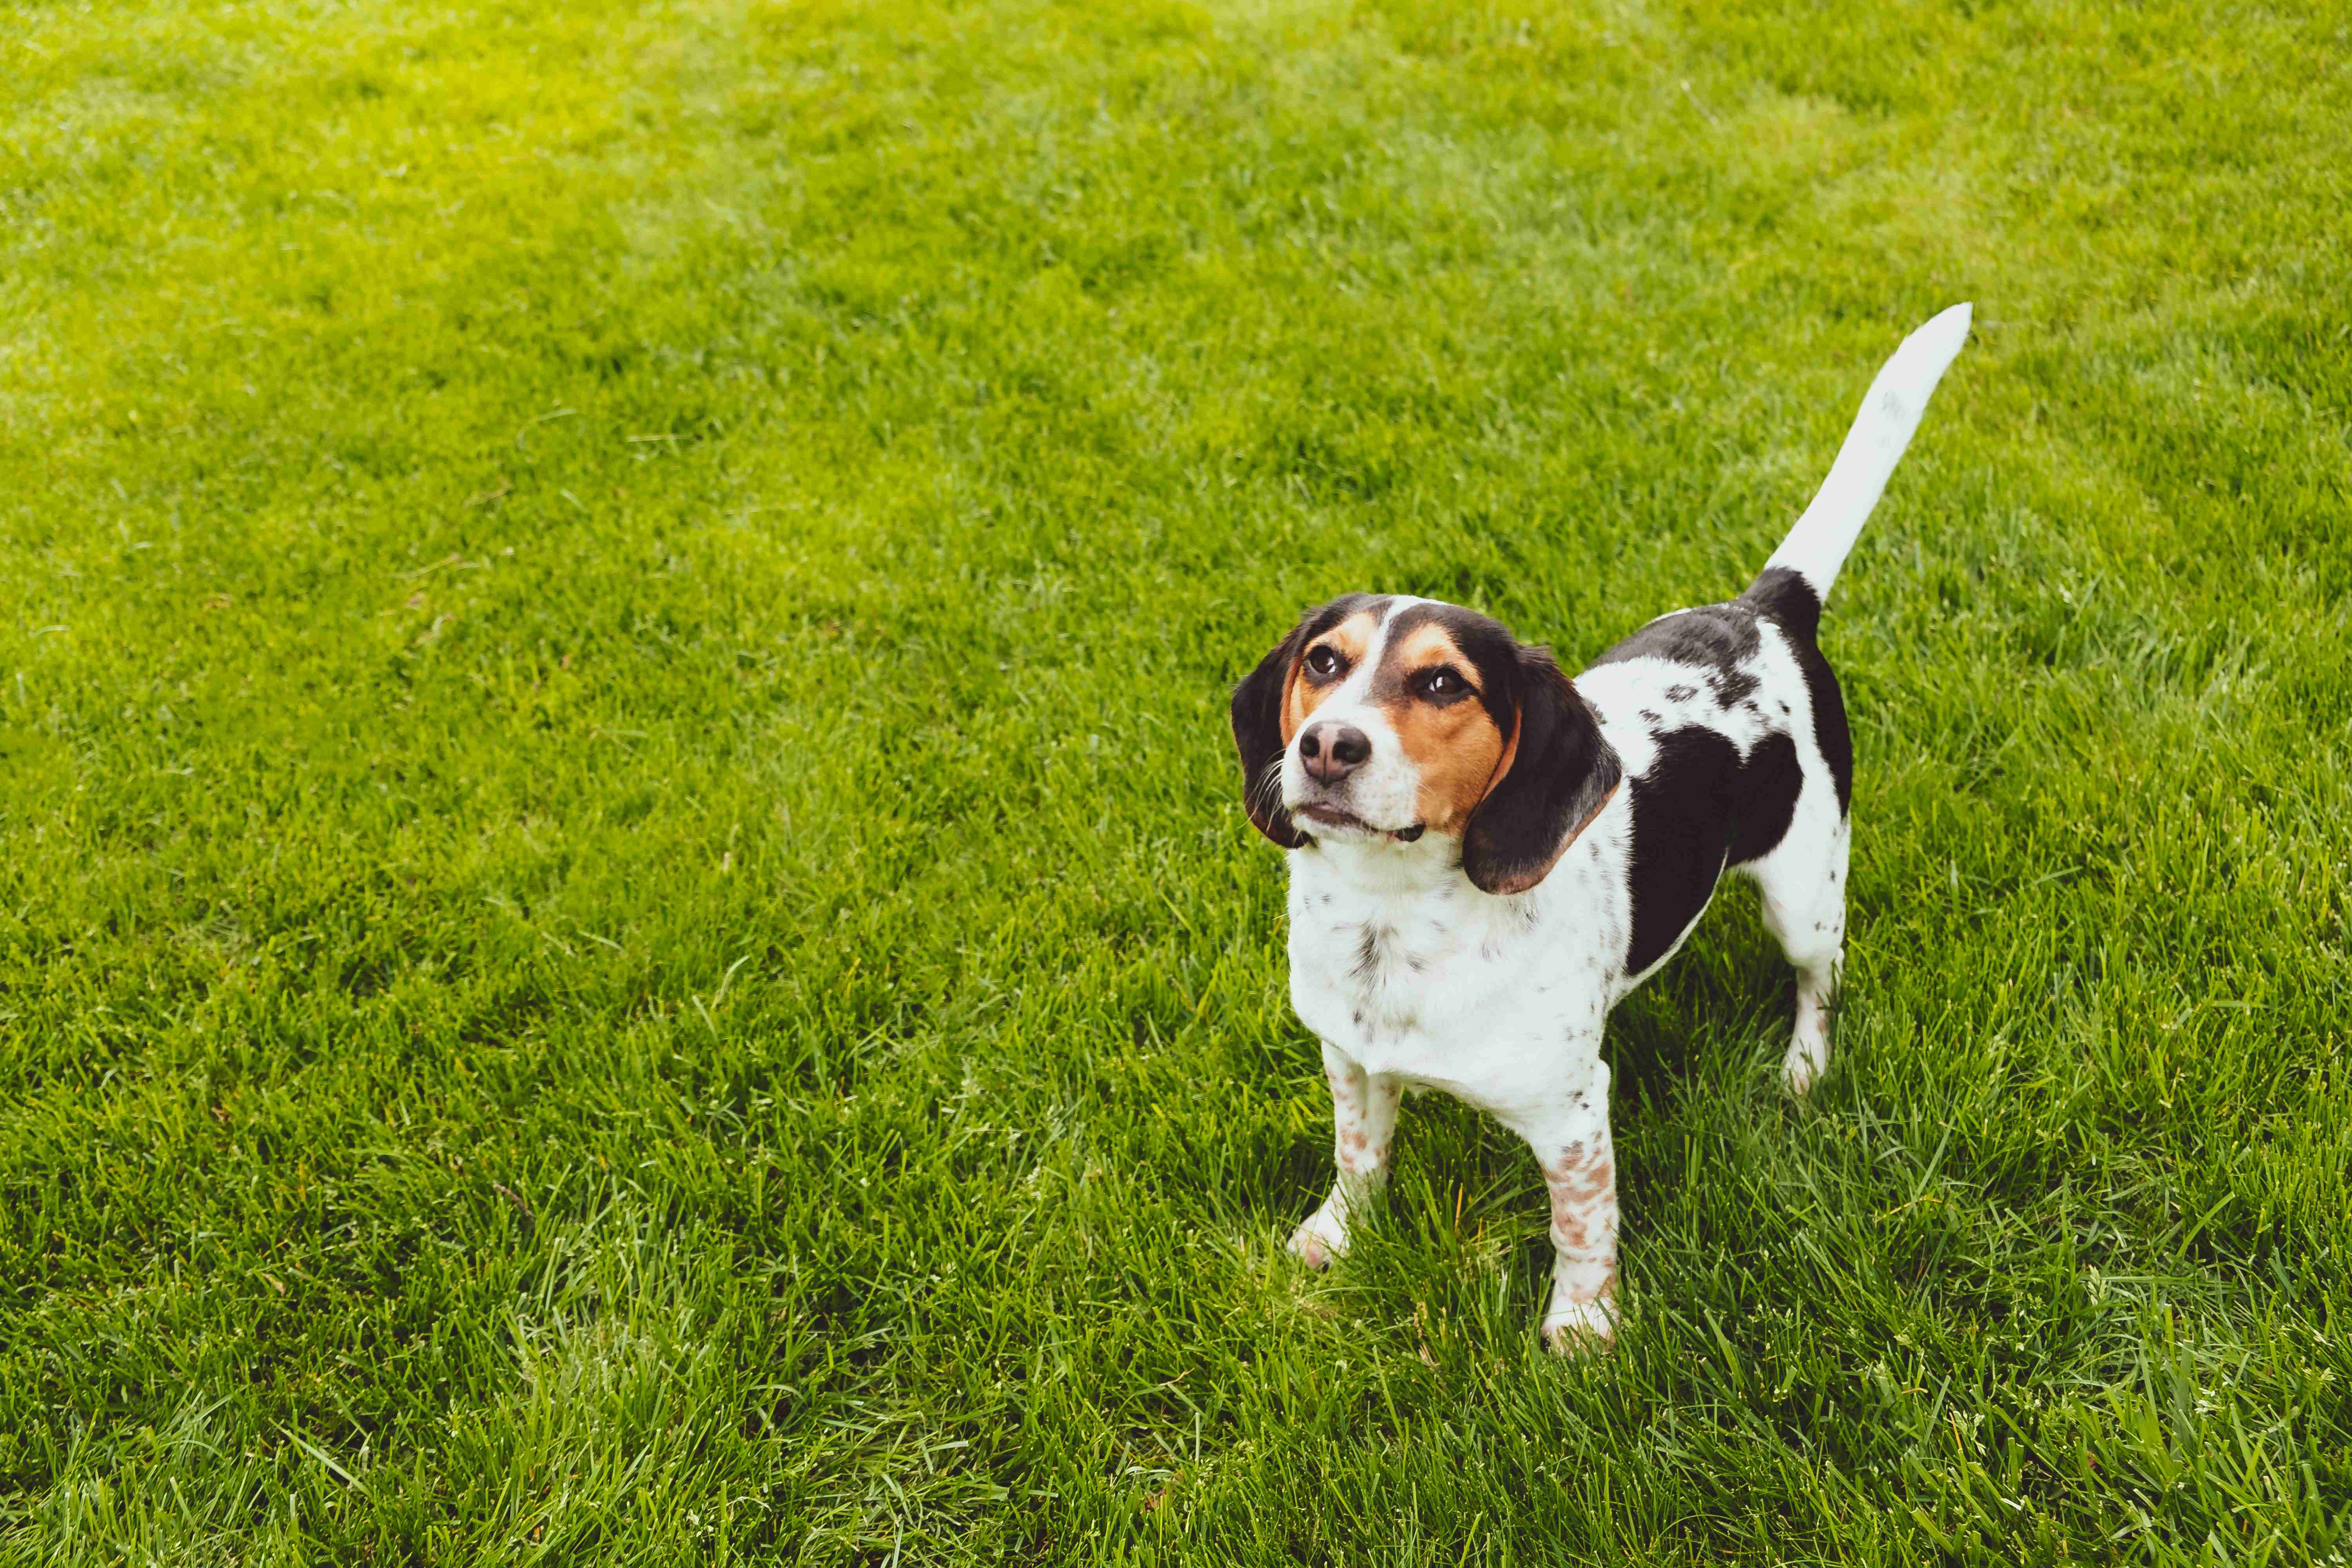 Beagle-Proofing Your Home: Tips to Prevent Destructive Digging and Chewing